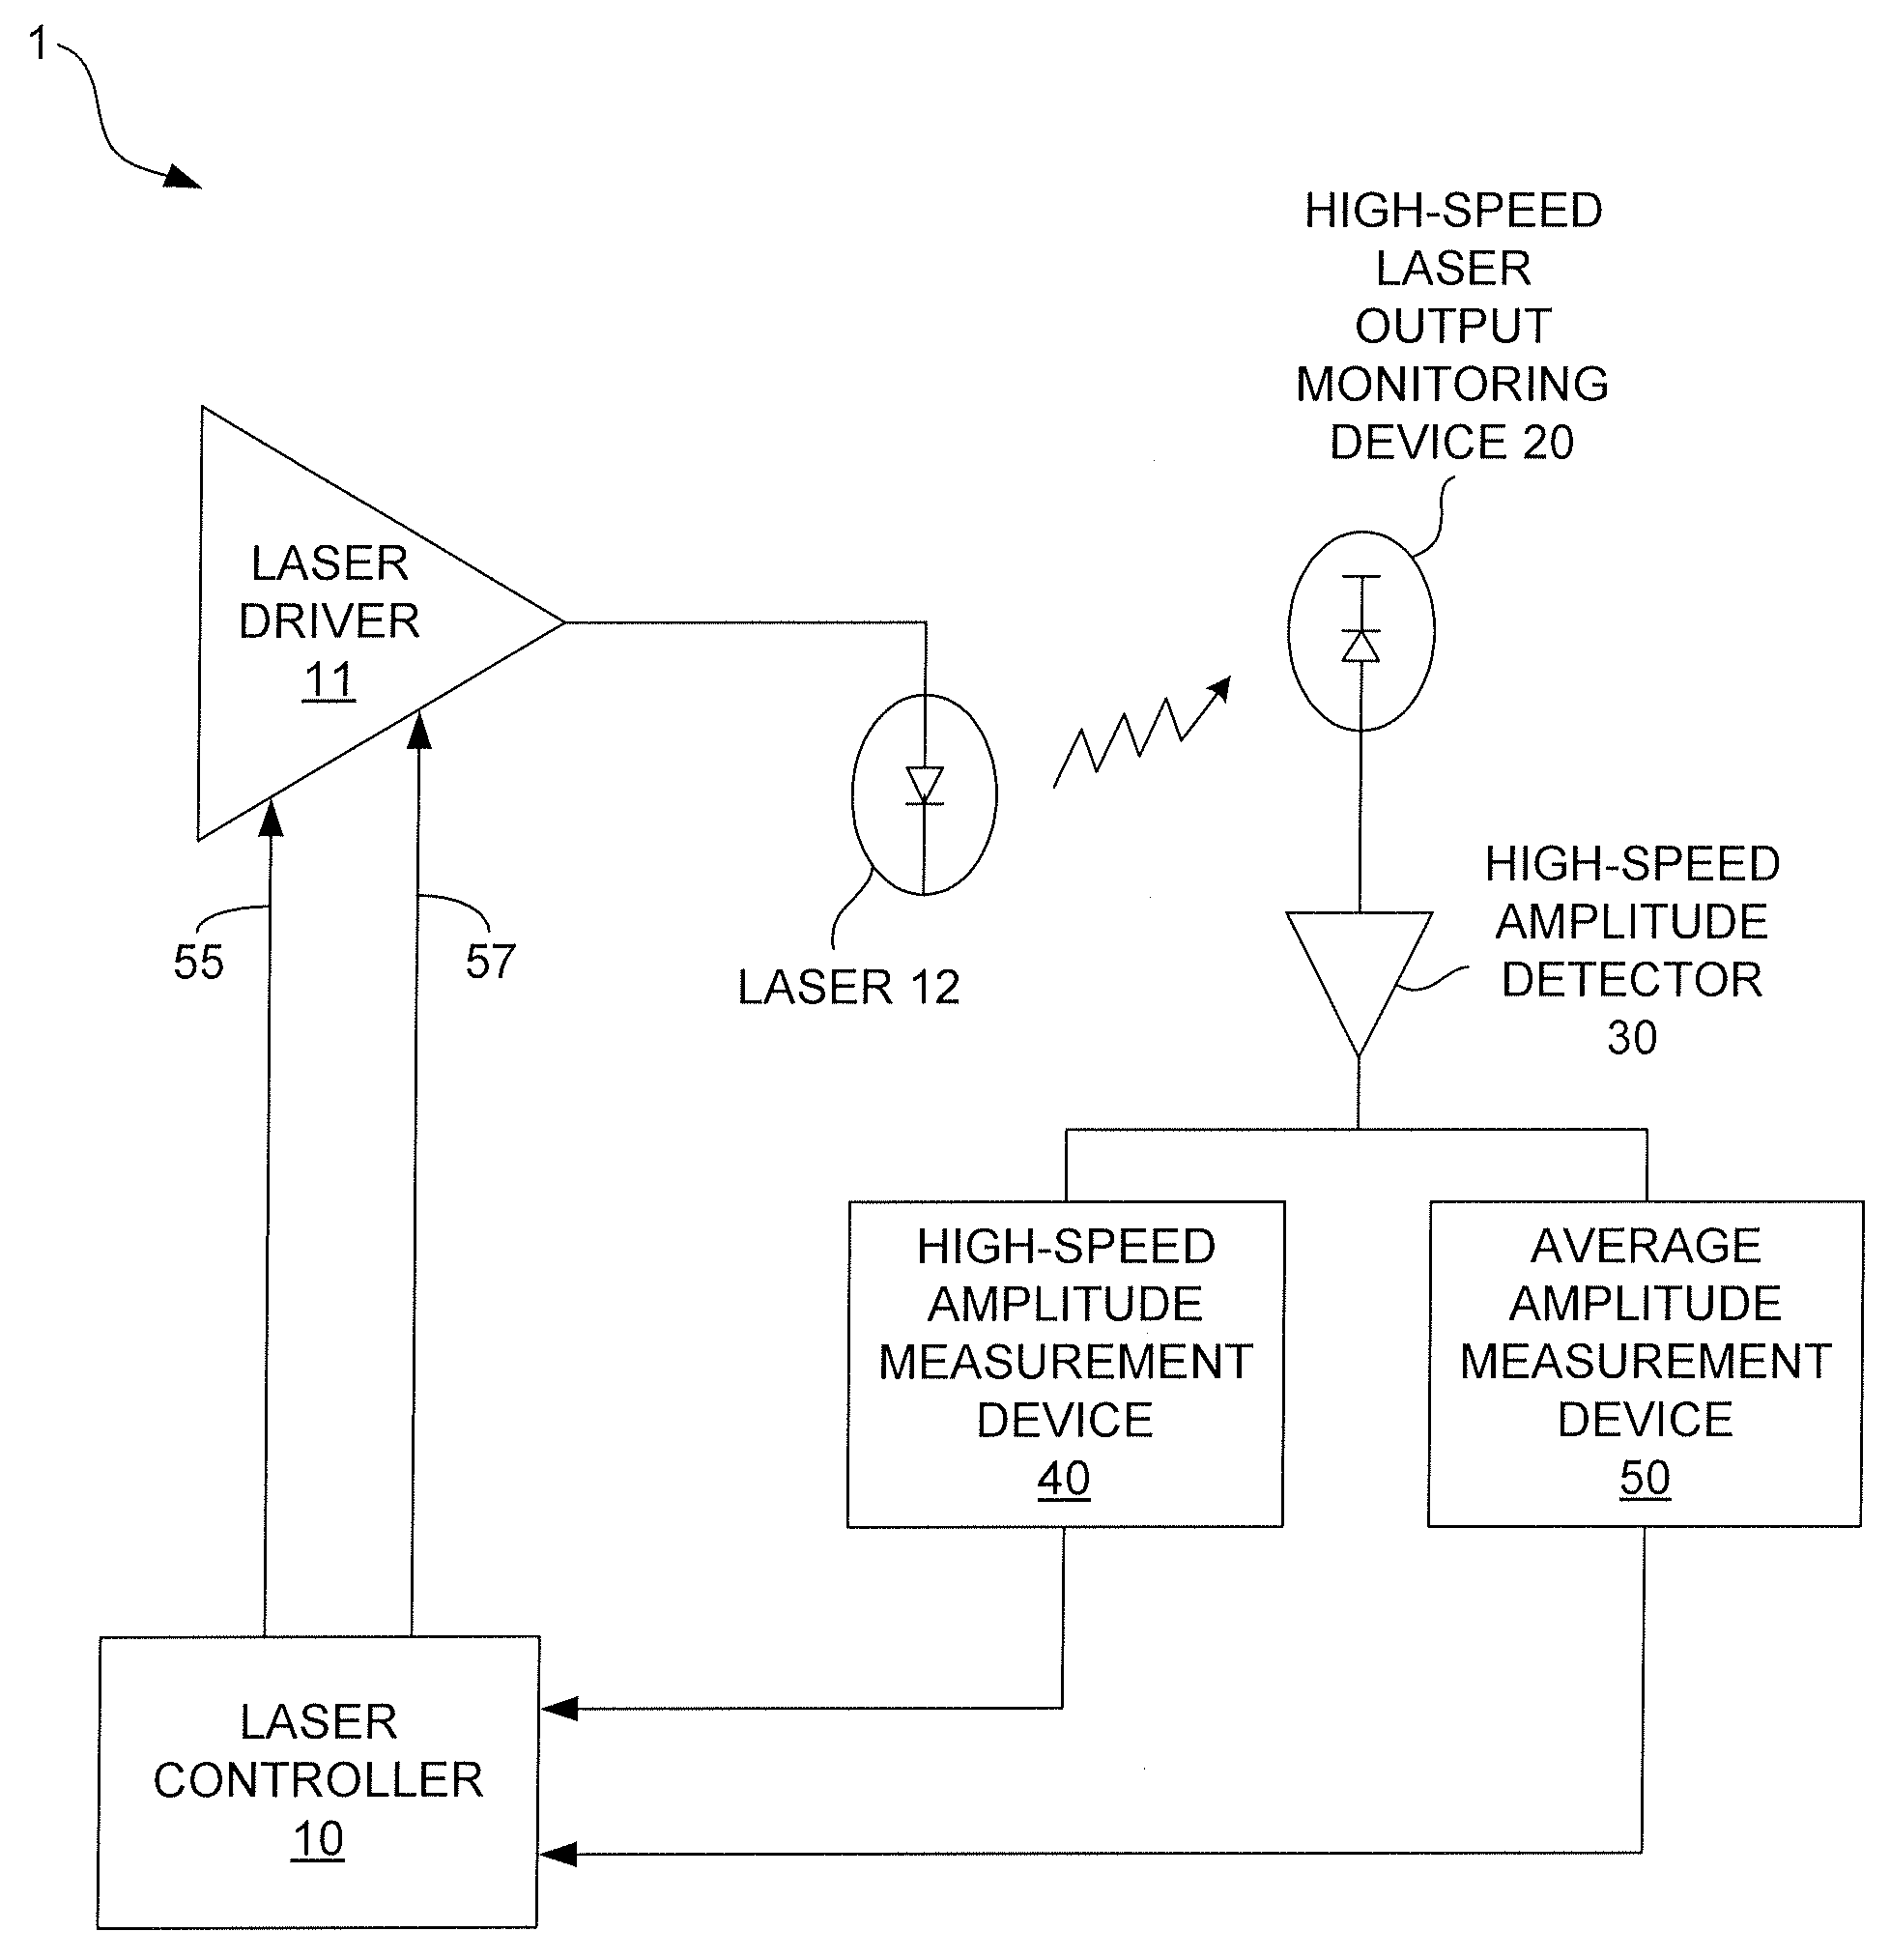 Method and apparatus for controlling output power levels of a laser used for optical data transmission based on data rate-speed optical feedback